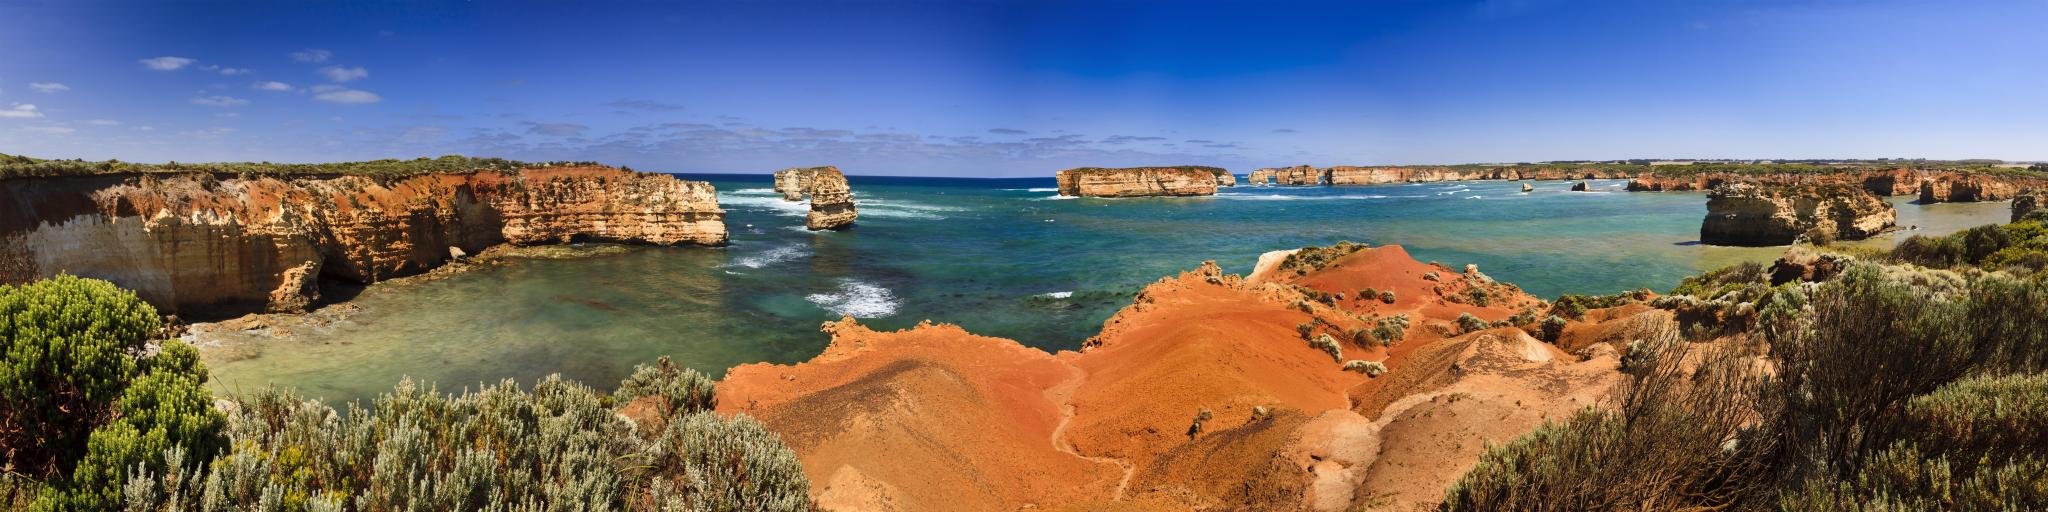 Panoramic view of cliffs around a wide bay with calm turquoise ocean 